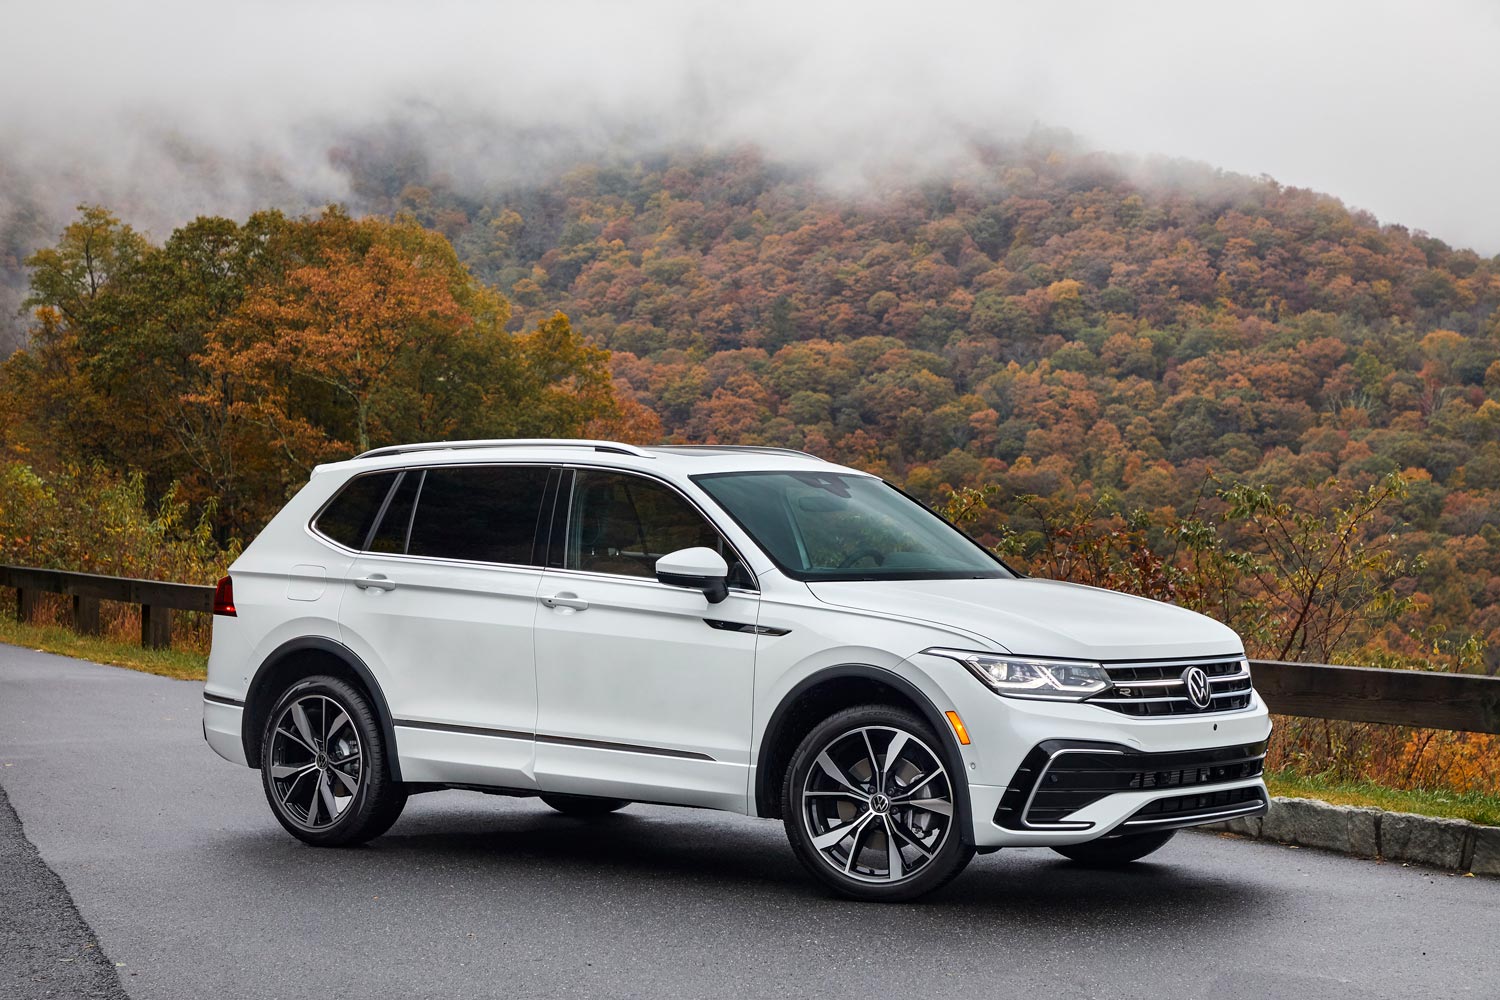 From three-quarter view of a white 2022 VW Tiguan